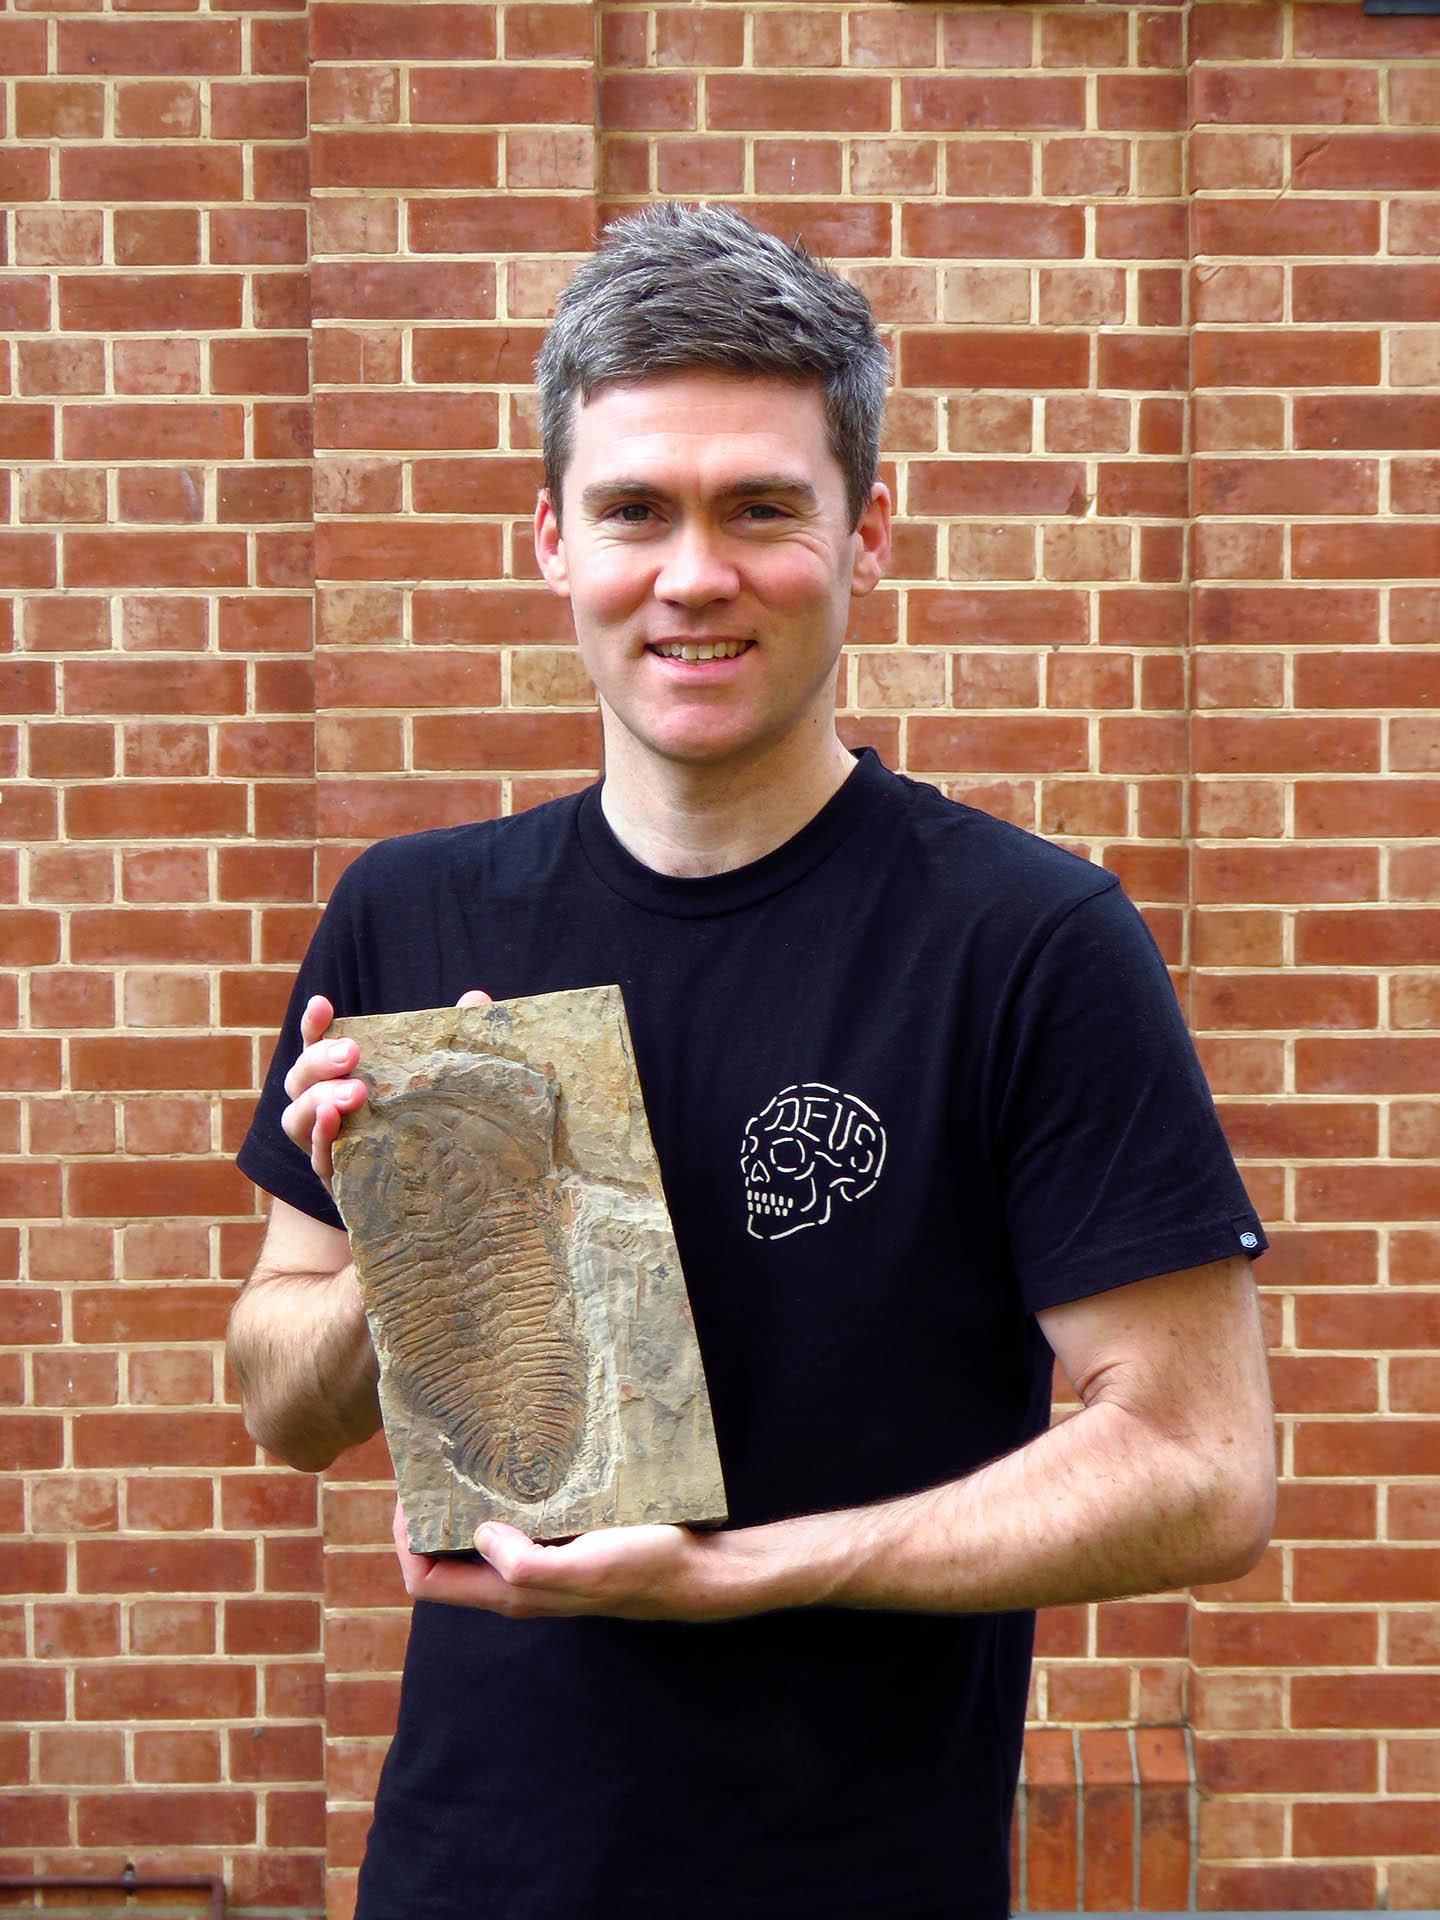 Lead researcher James Holmes, University of Adelaide, with a fossil of the giant new trilobite species Redlichia rex